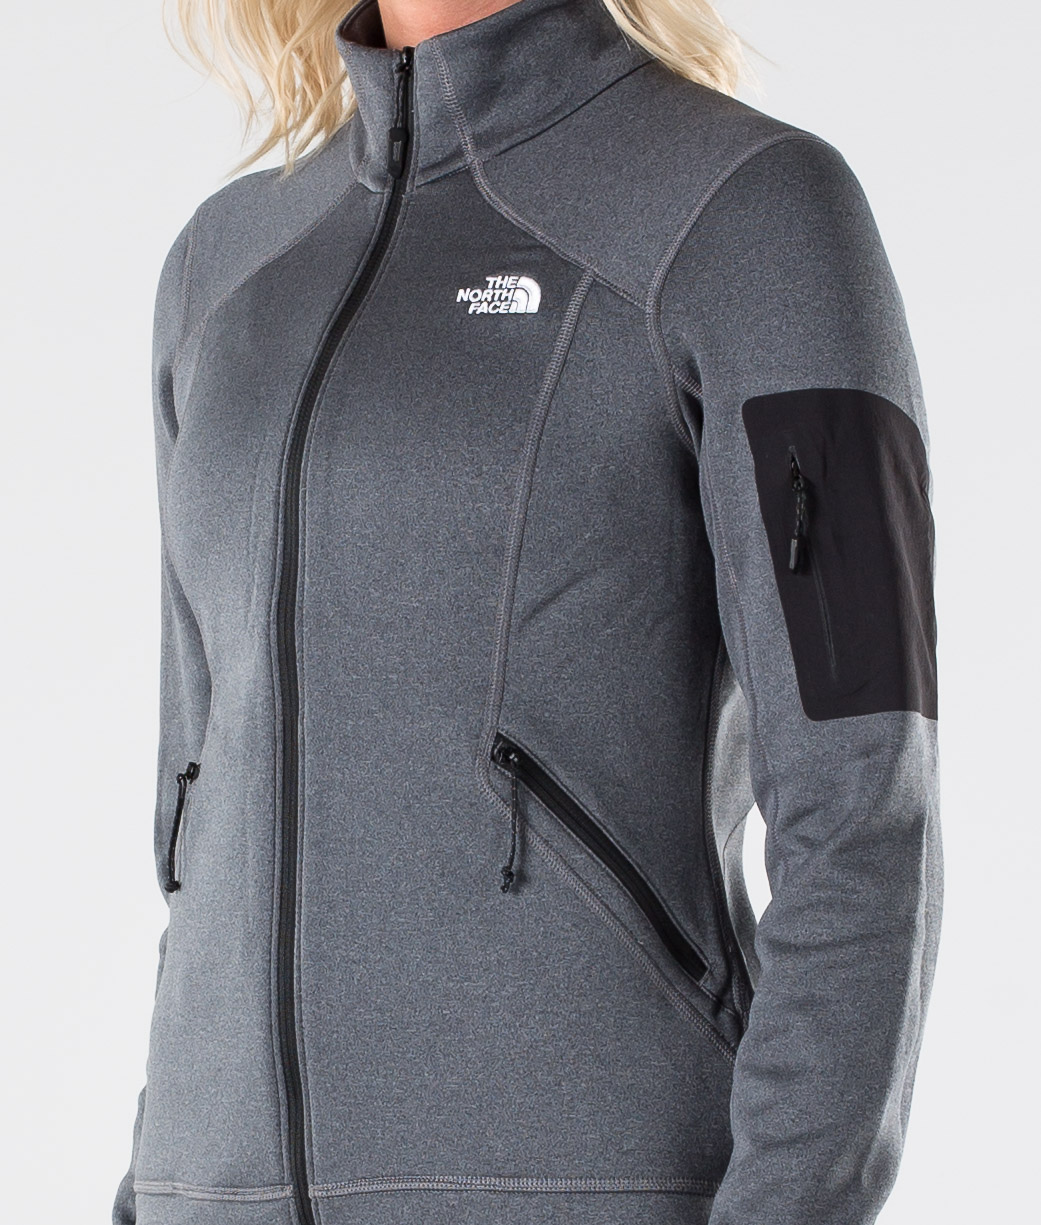 north face impendor review